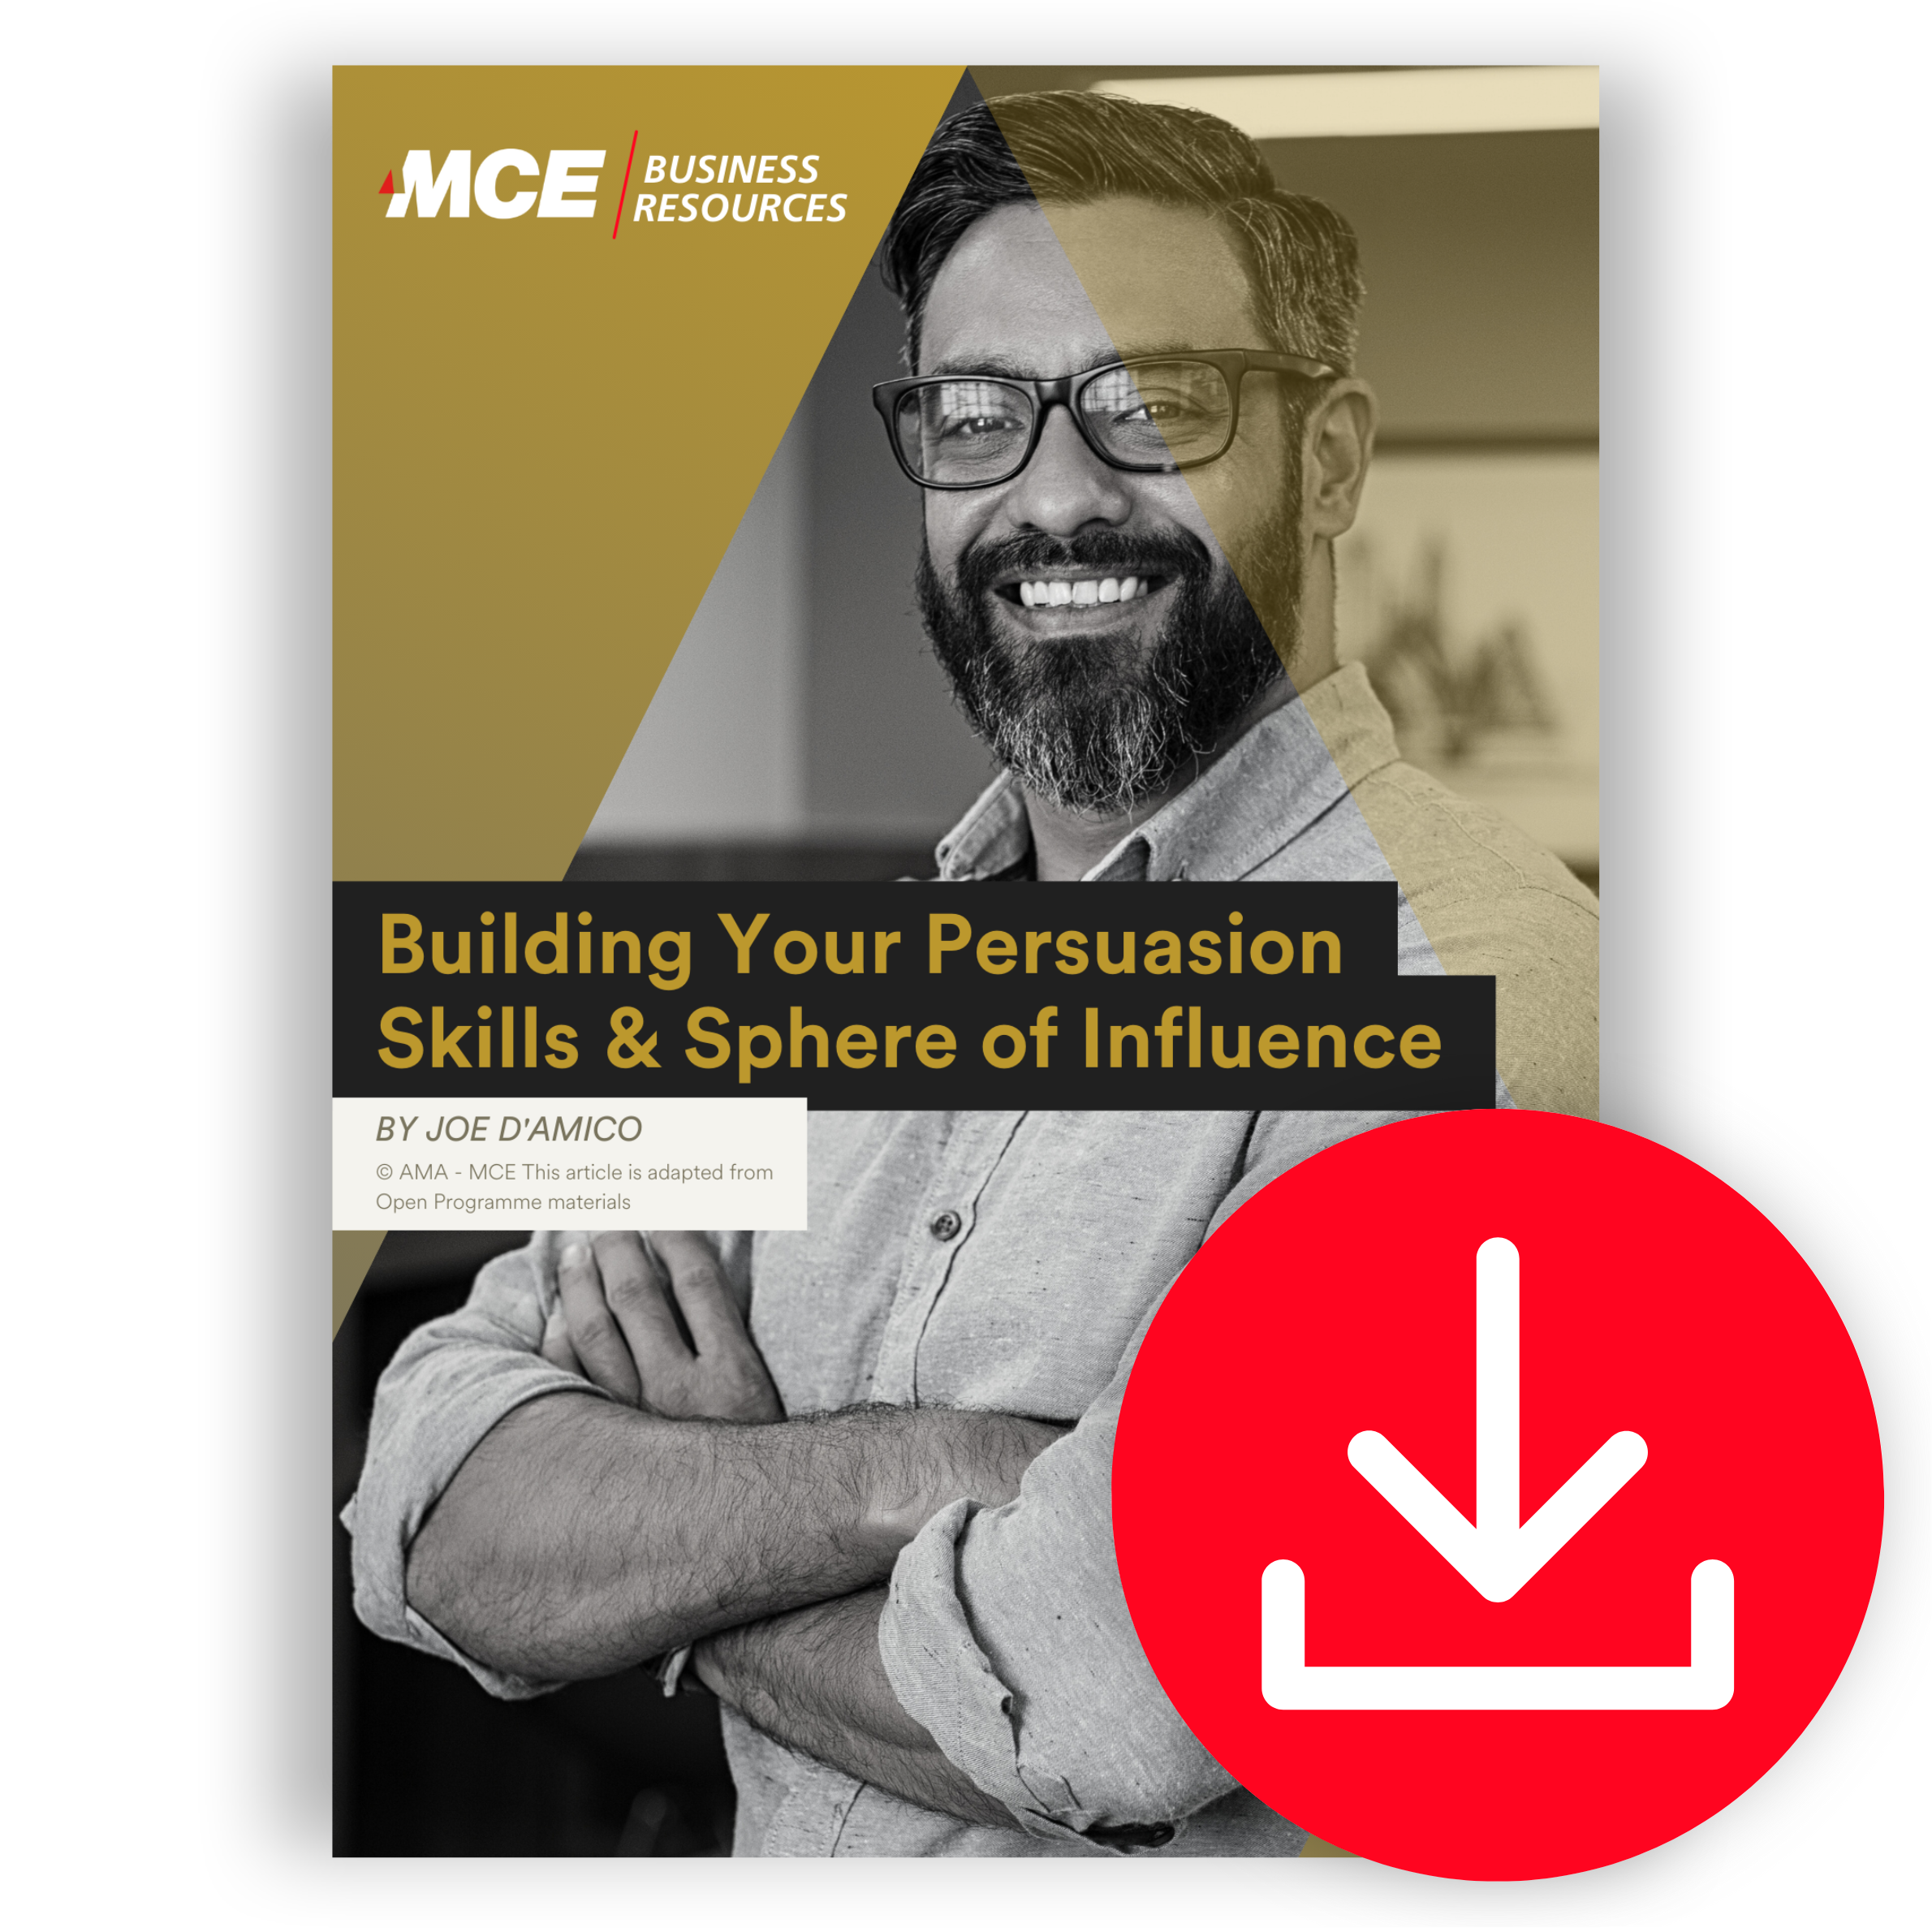 Building Your Persuasion Skills & Sphere of Influence